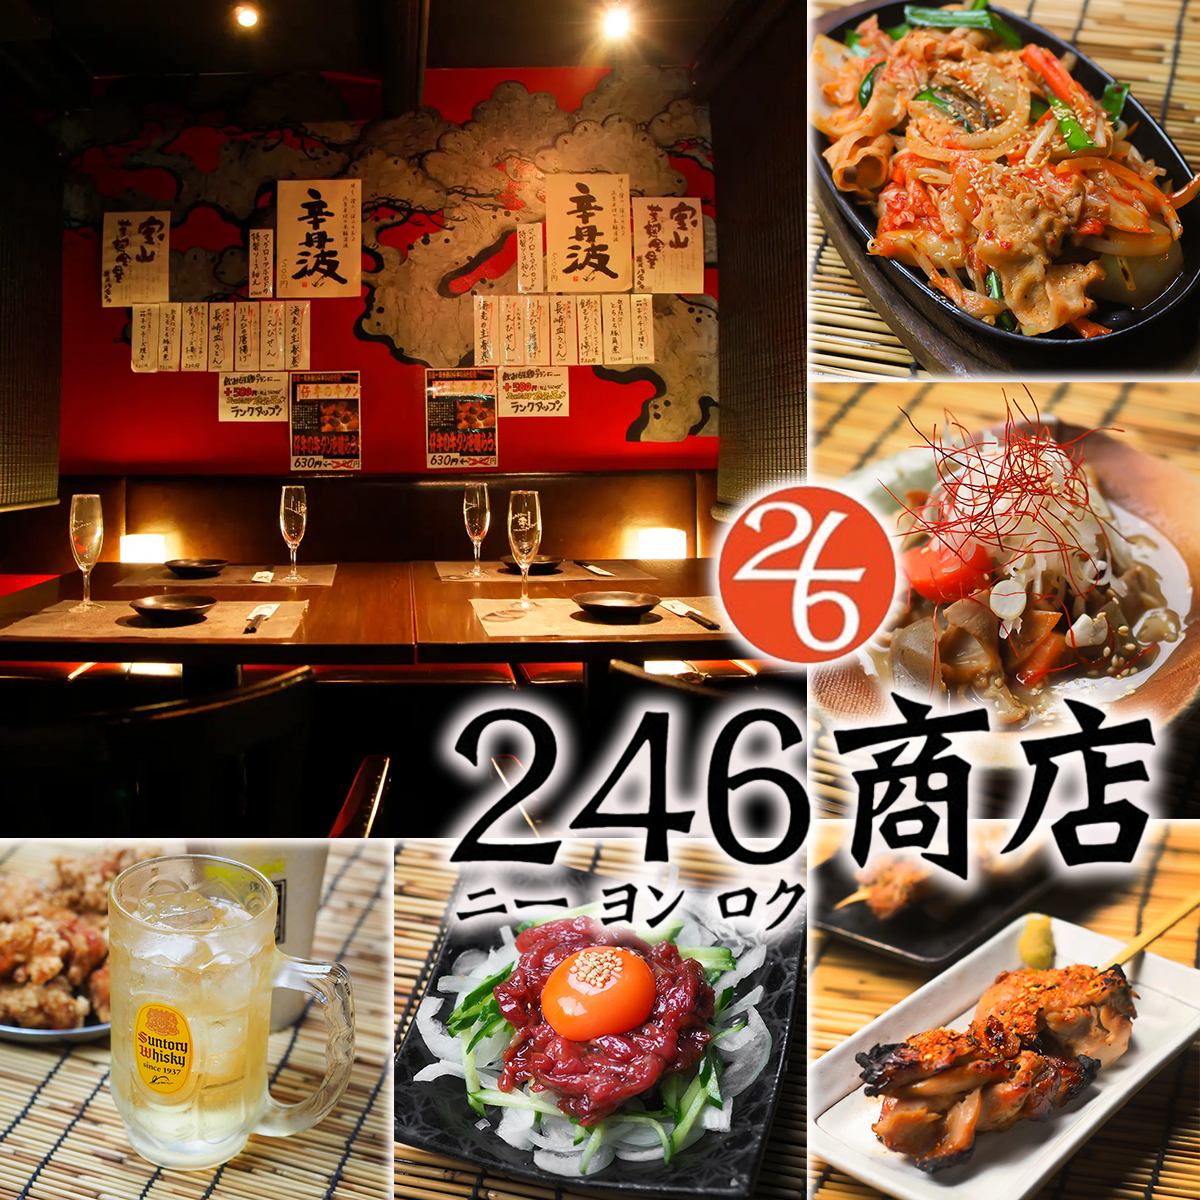 All-you-can-eat and drink for 200 JPY, 400 JPY, and 600 JPY!